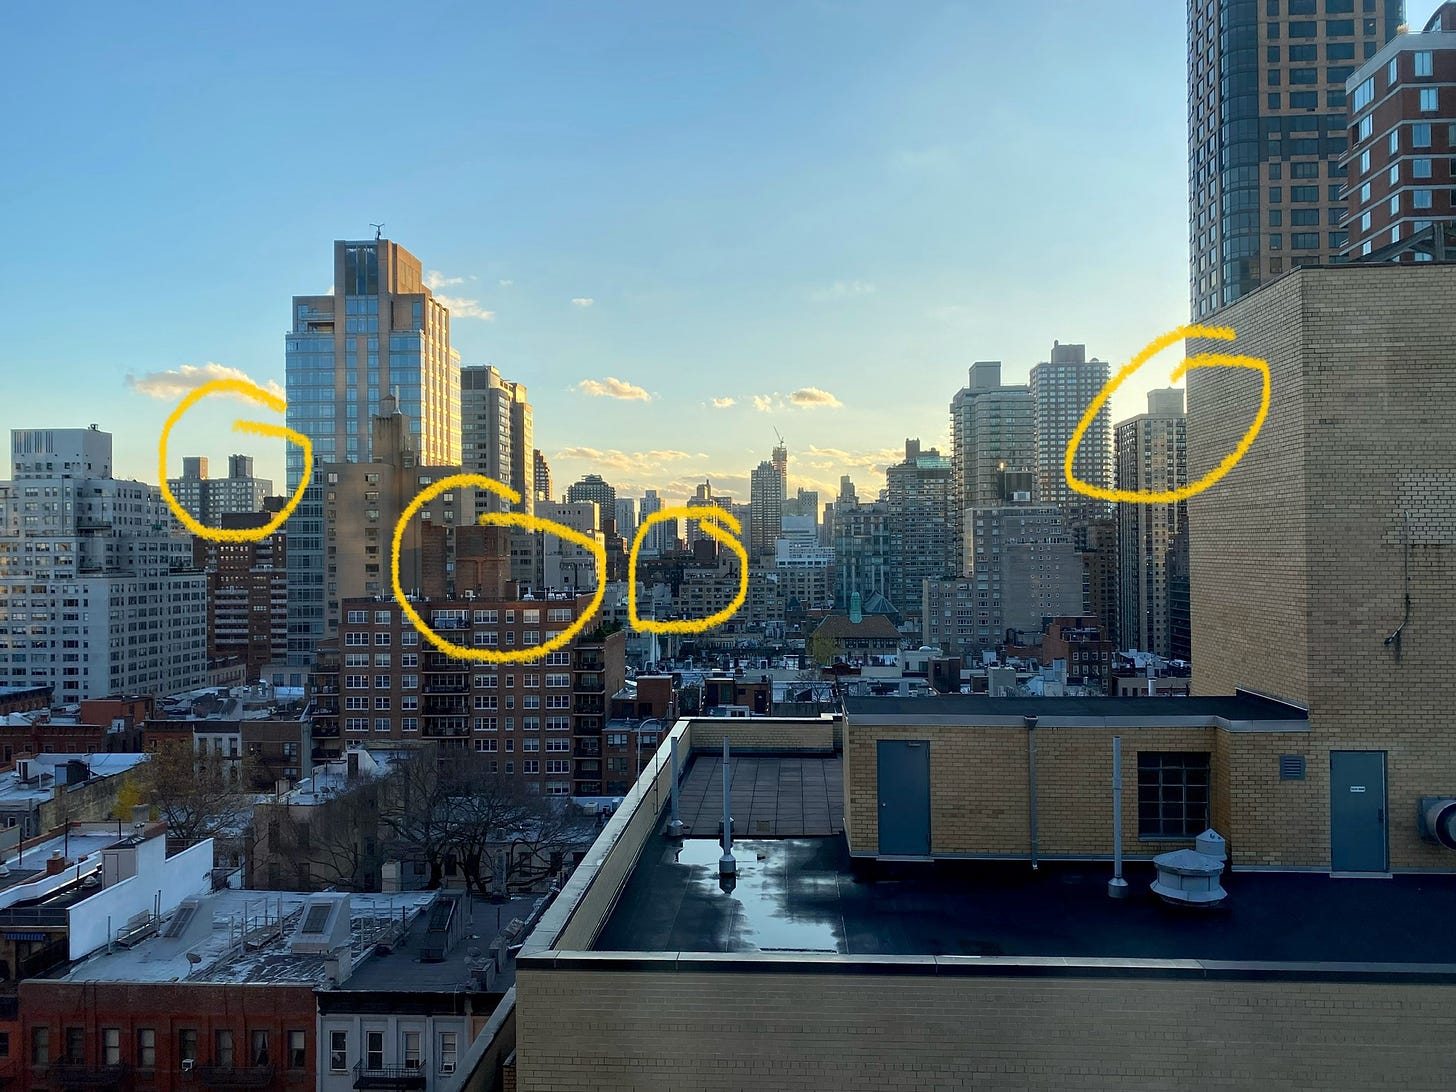 The skyline from an upper floor window. Five stone structures are circled in yellow to highlight that you can just make out the points of the roofs of the water towers they're holding.